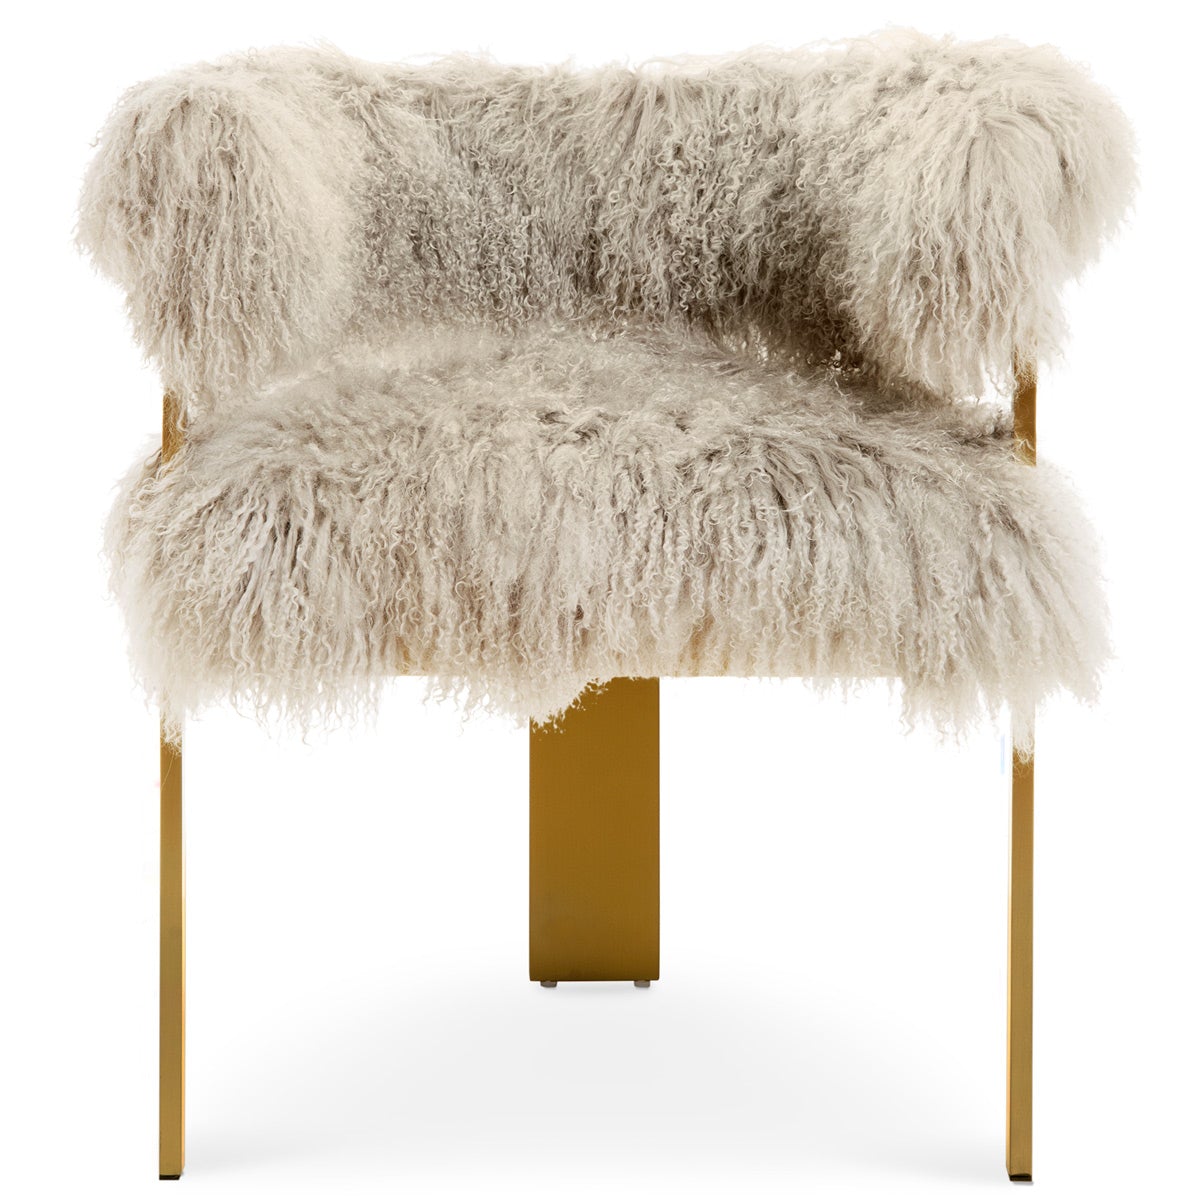 Marseille Dining Chair in Mongolian Fur - ModShop1.com